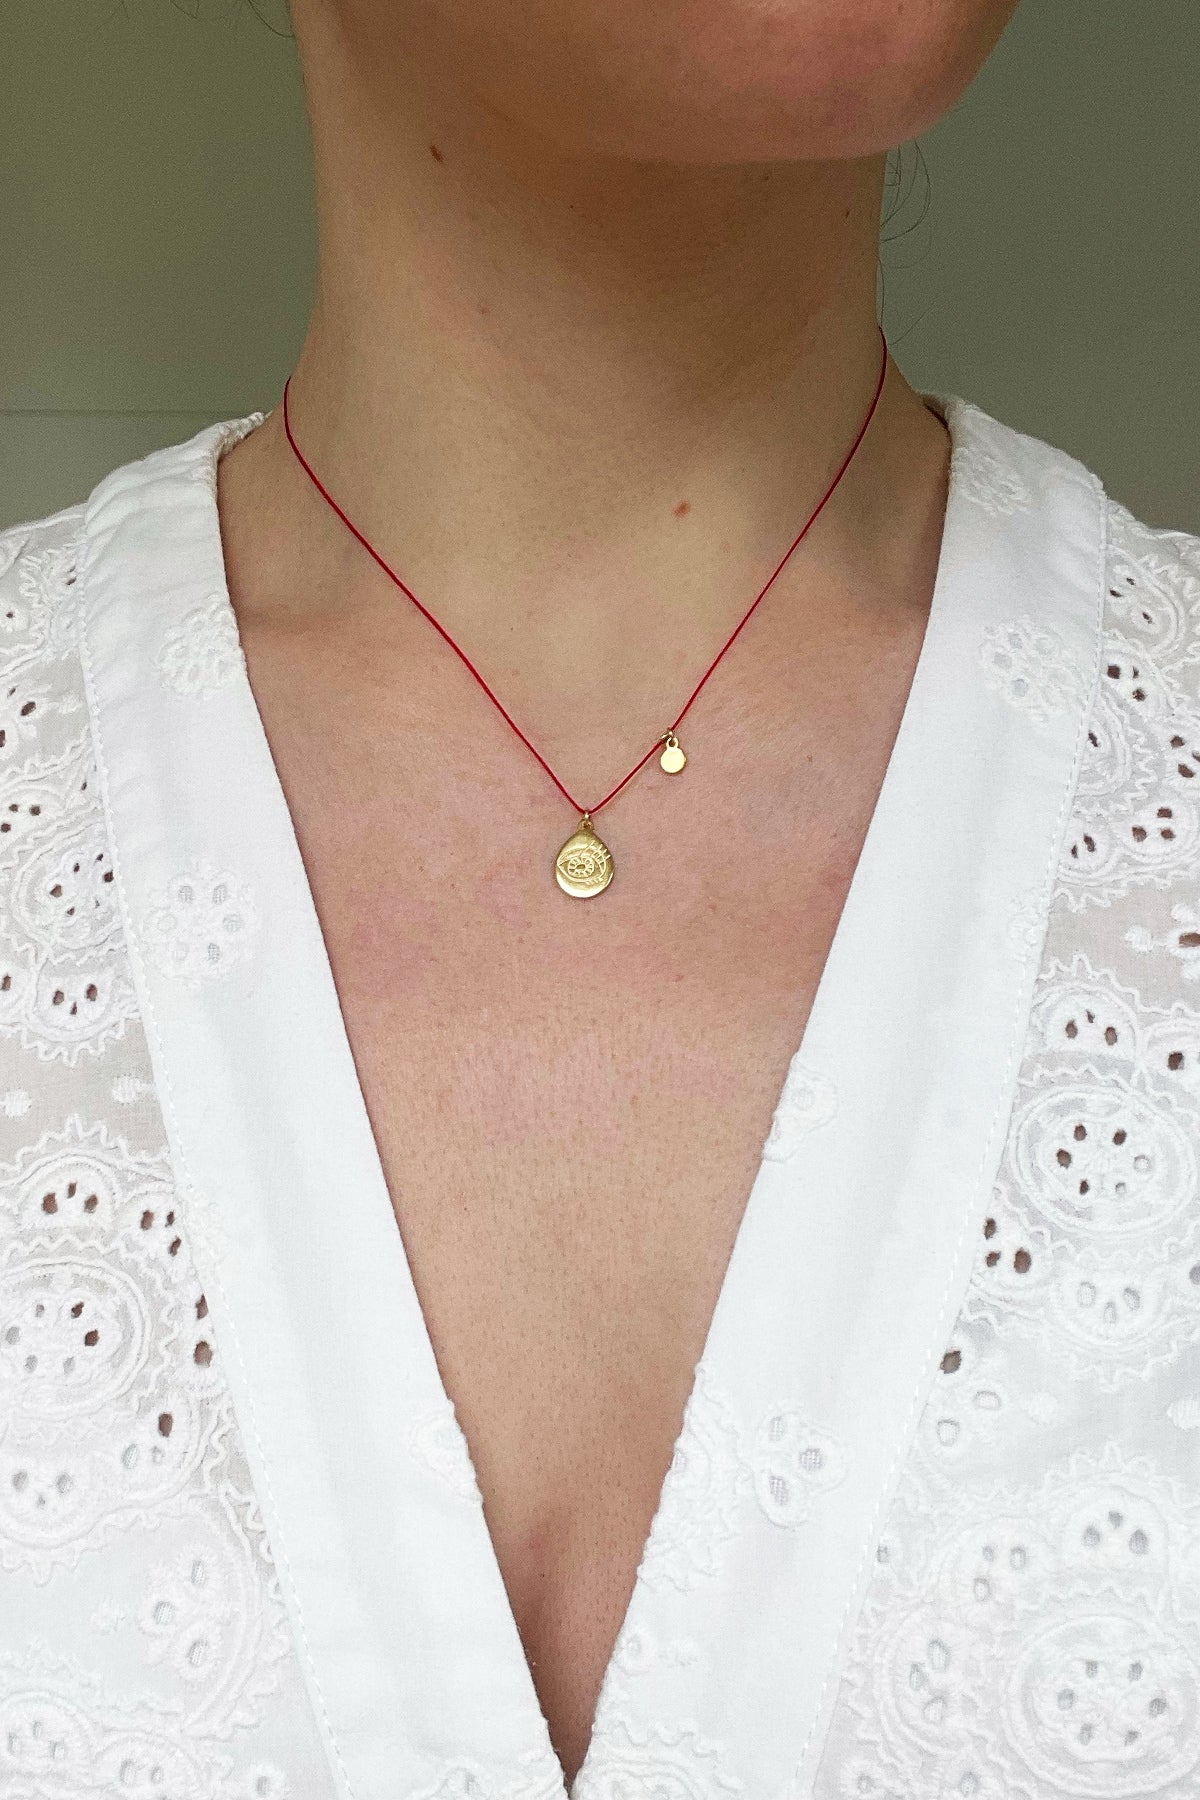 STRING NECKLACE "BIG MODERN MATI" RED/GOLD